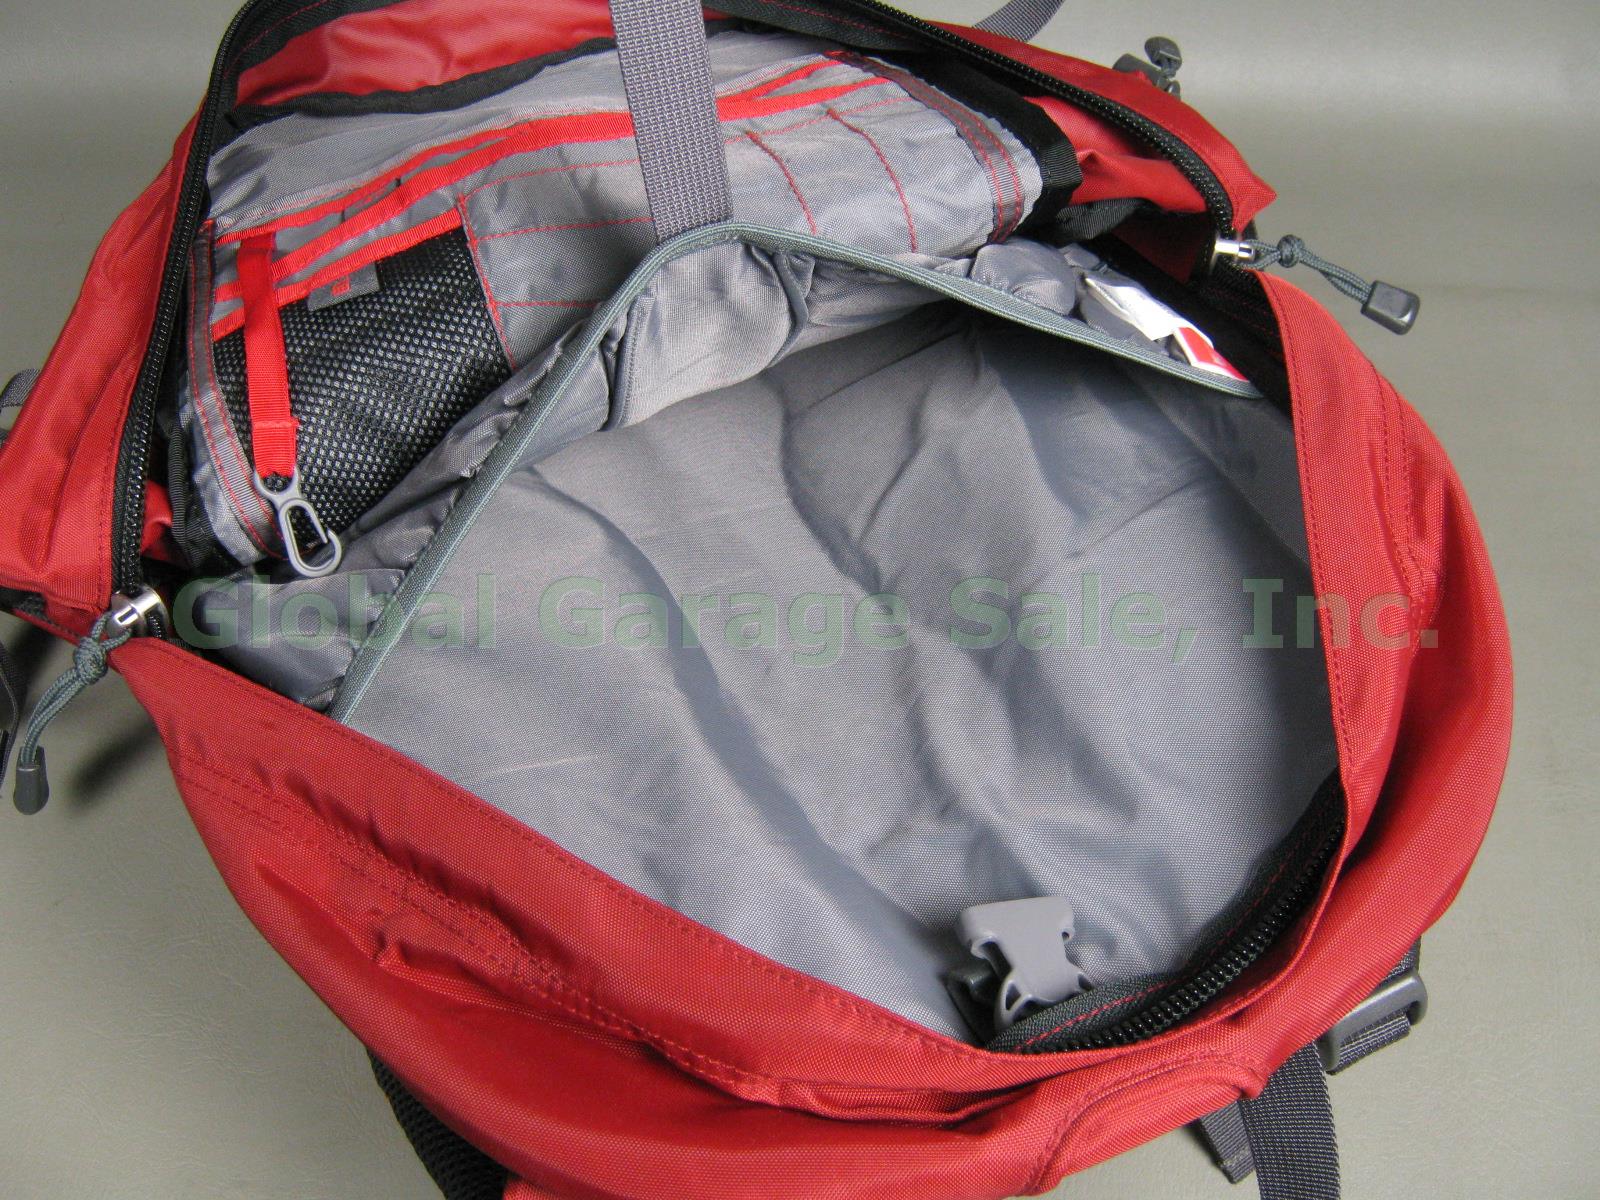 NEW NWT The North Face Big Shot Backpack Day Pack Laptop Book Bag Cardinal Red 8